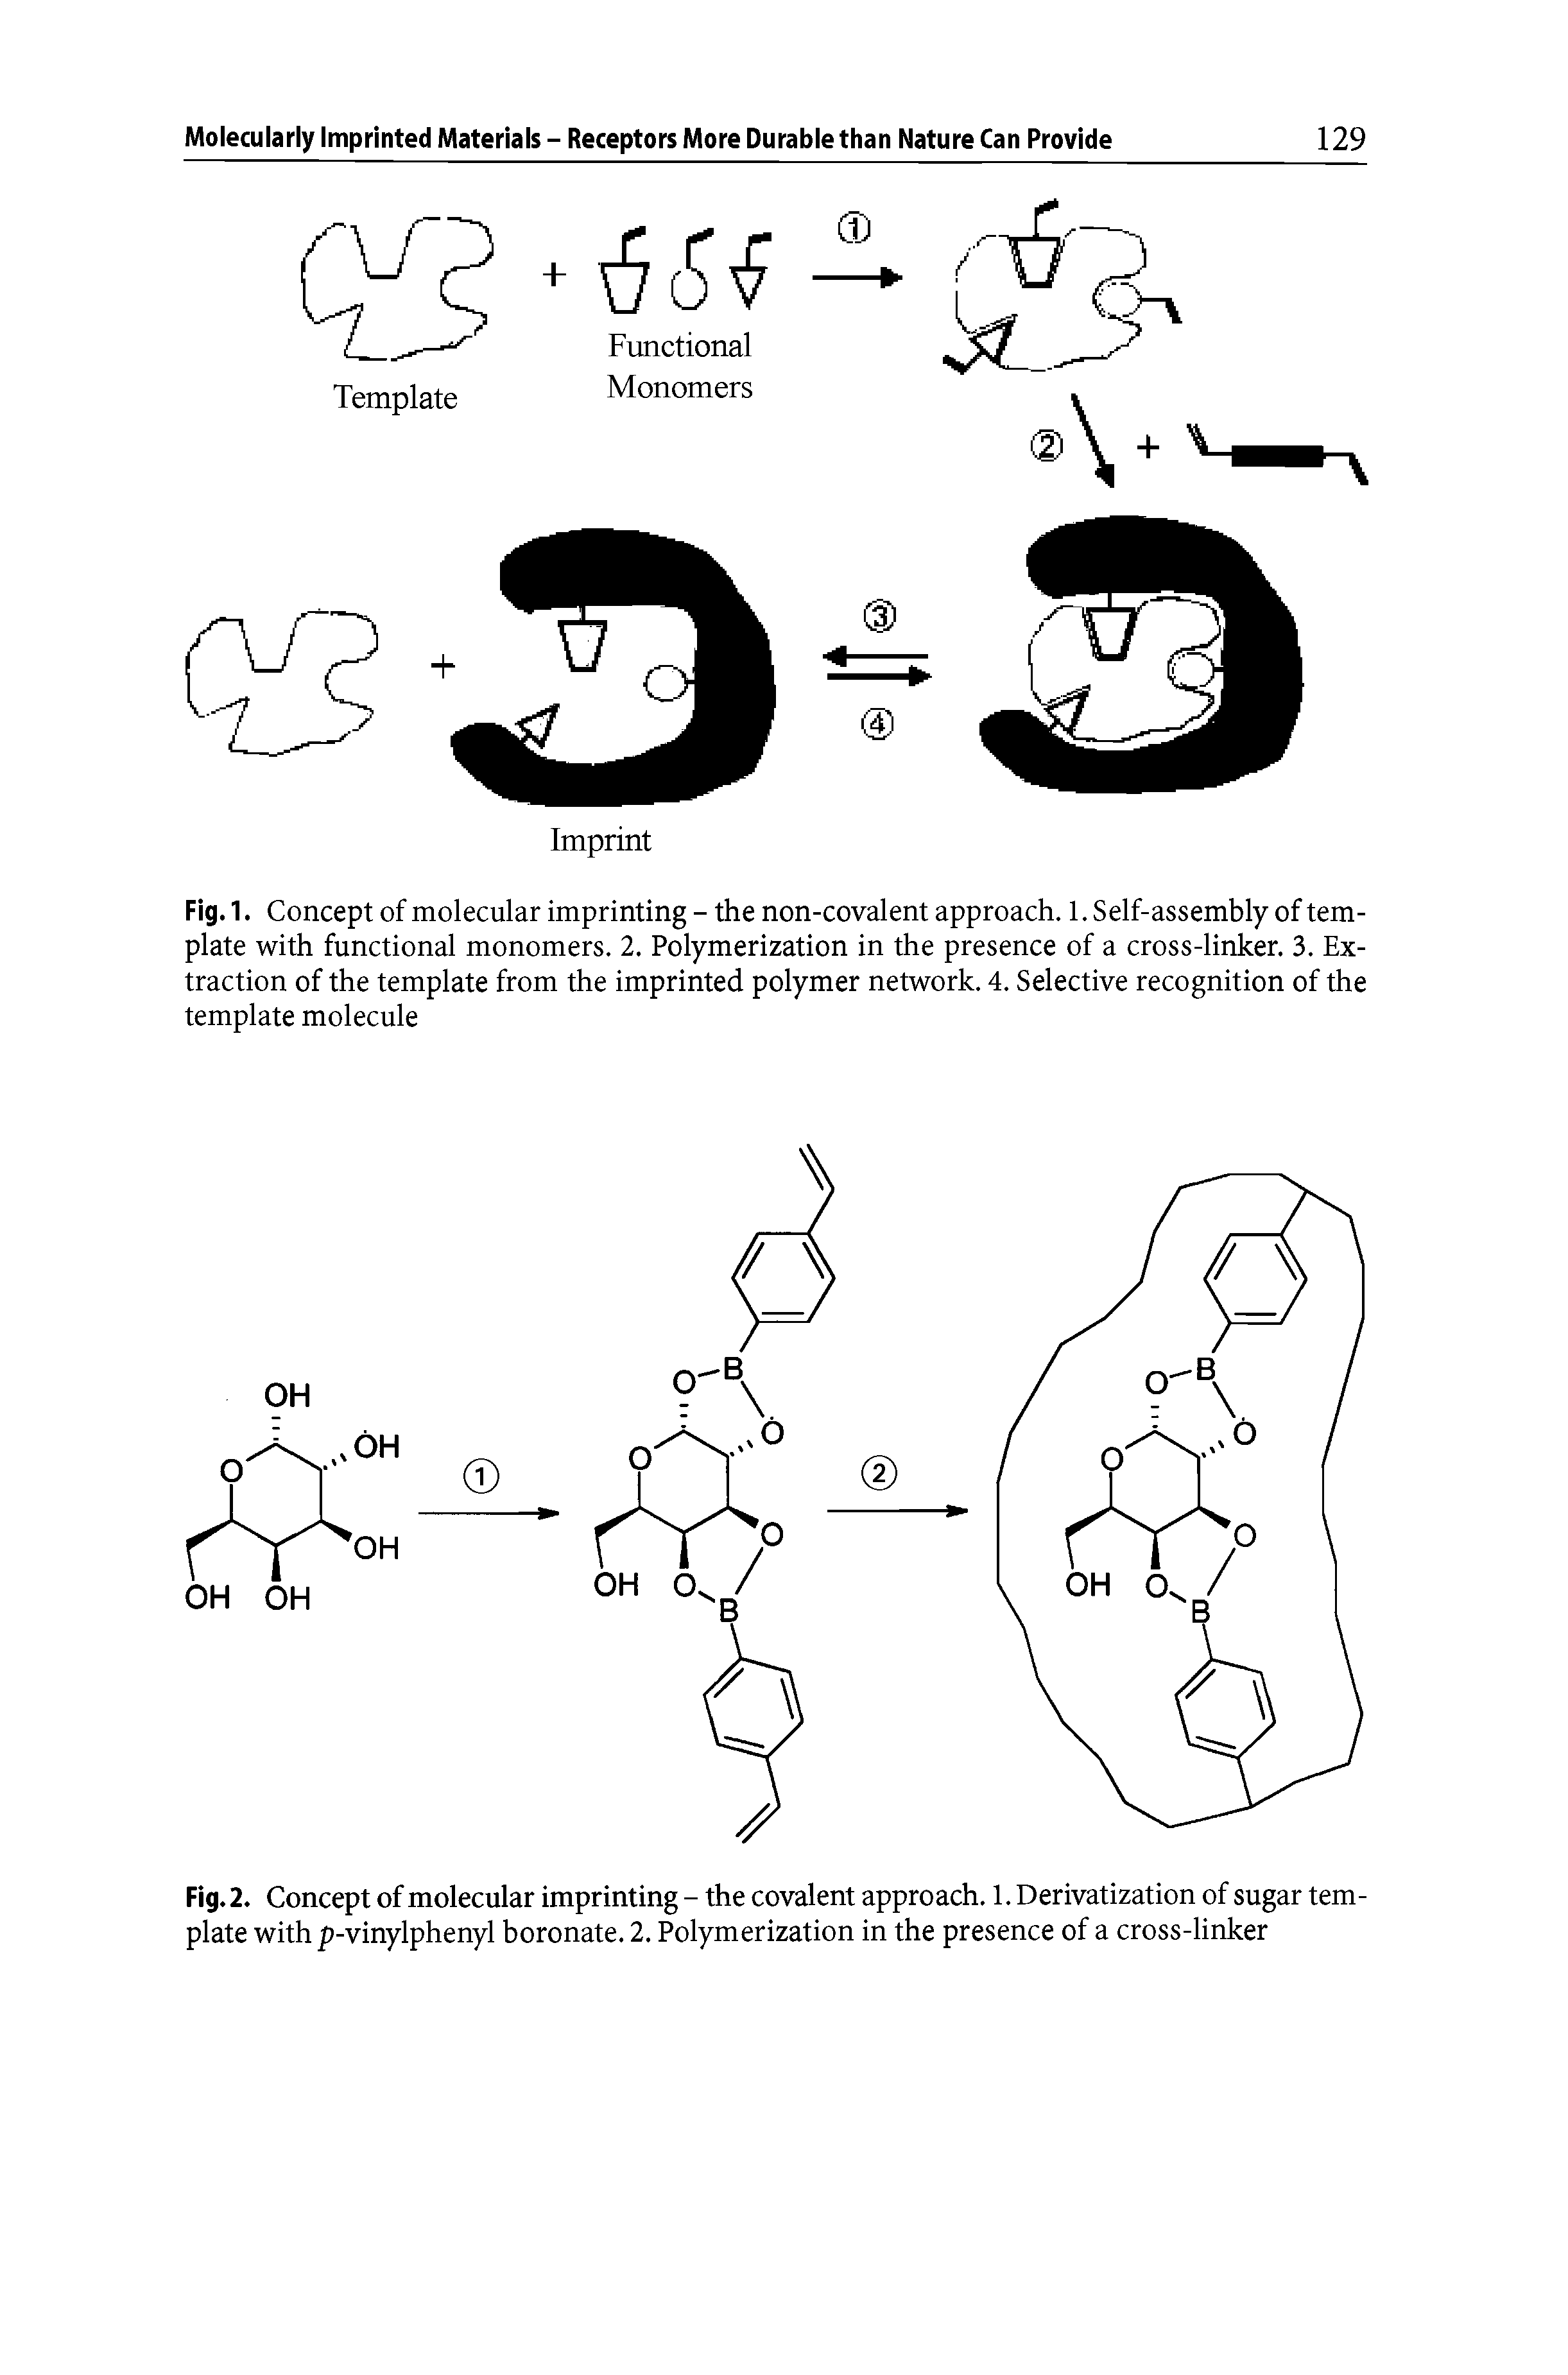 Fig. 1. Concept of molecular imprinting - the non-covalent approach. 1. Self-assembly of template with functional monomers. 2. Polymerization in the presence of a cross-linker. 3. Extraction of the template from the imprinted polymer network. 4. Selective recognition of the template molecule...